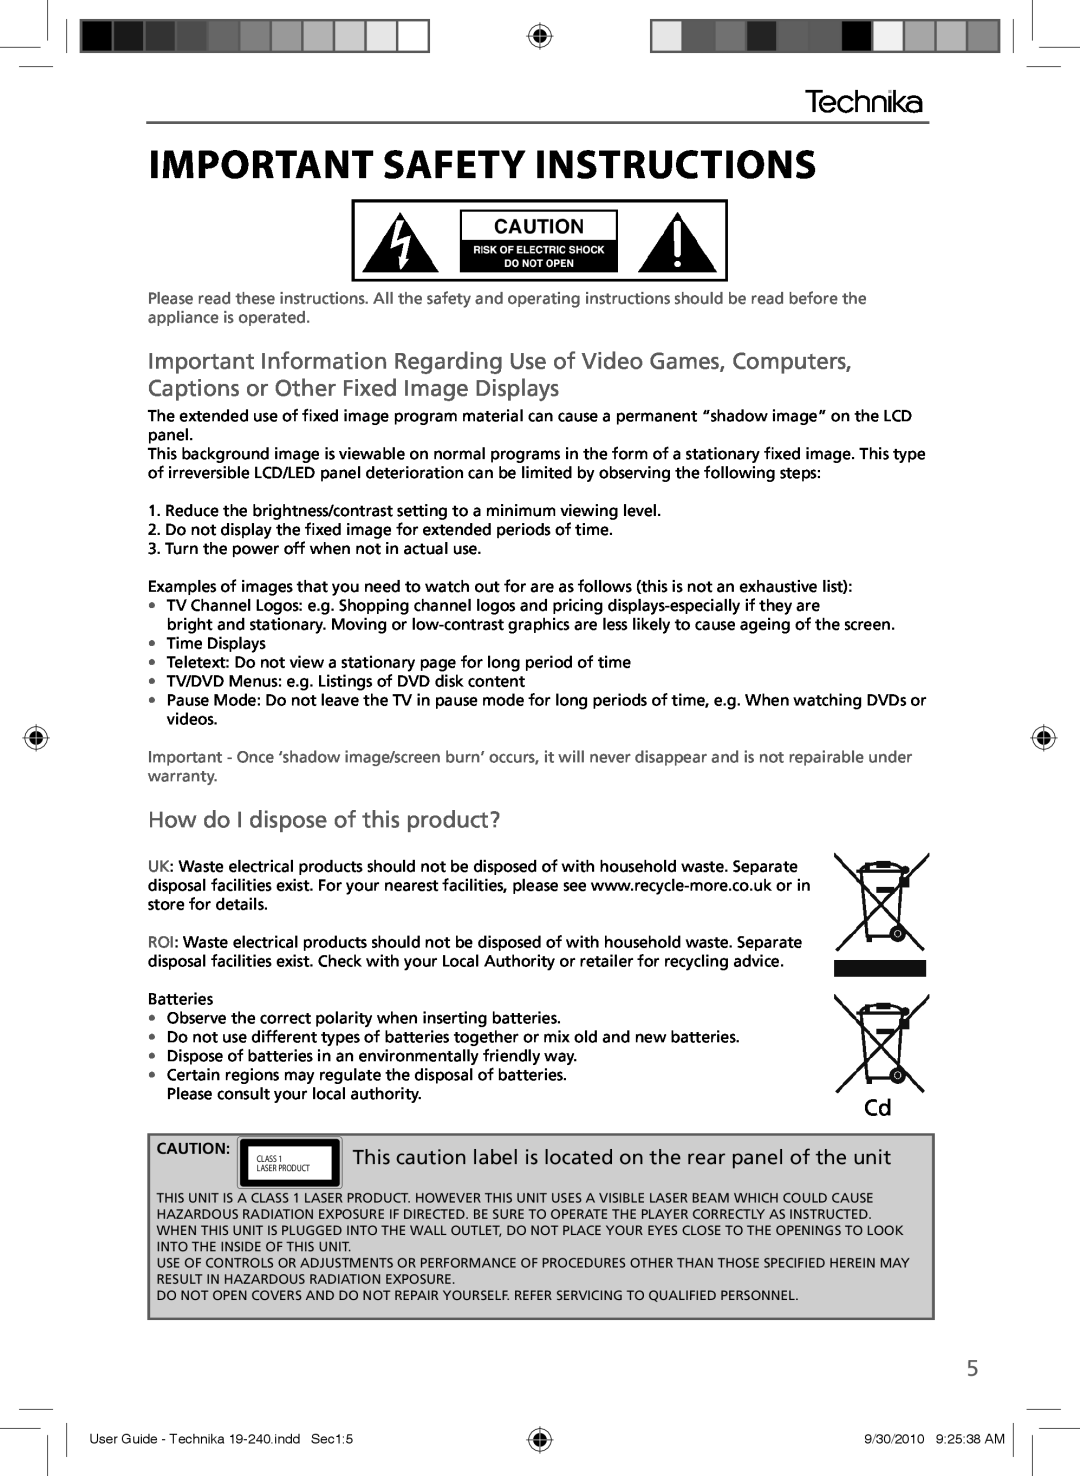 Technika LCD 19-240 manual How do I dispose of this product?, Important Safety Instructions 